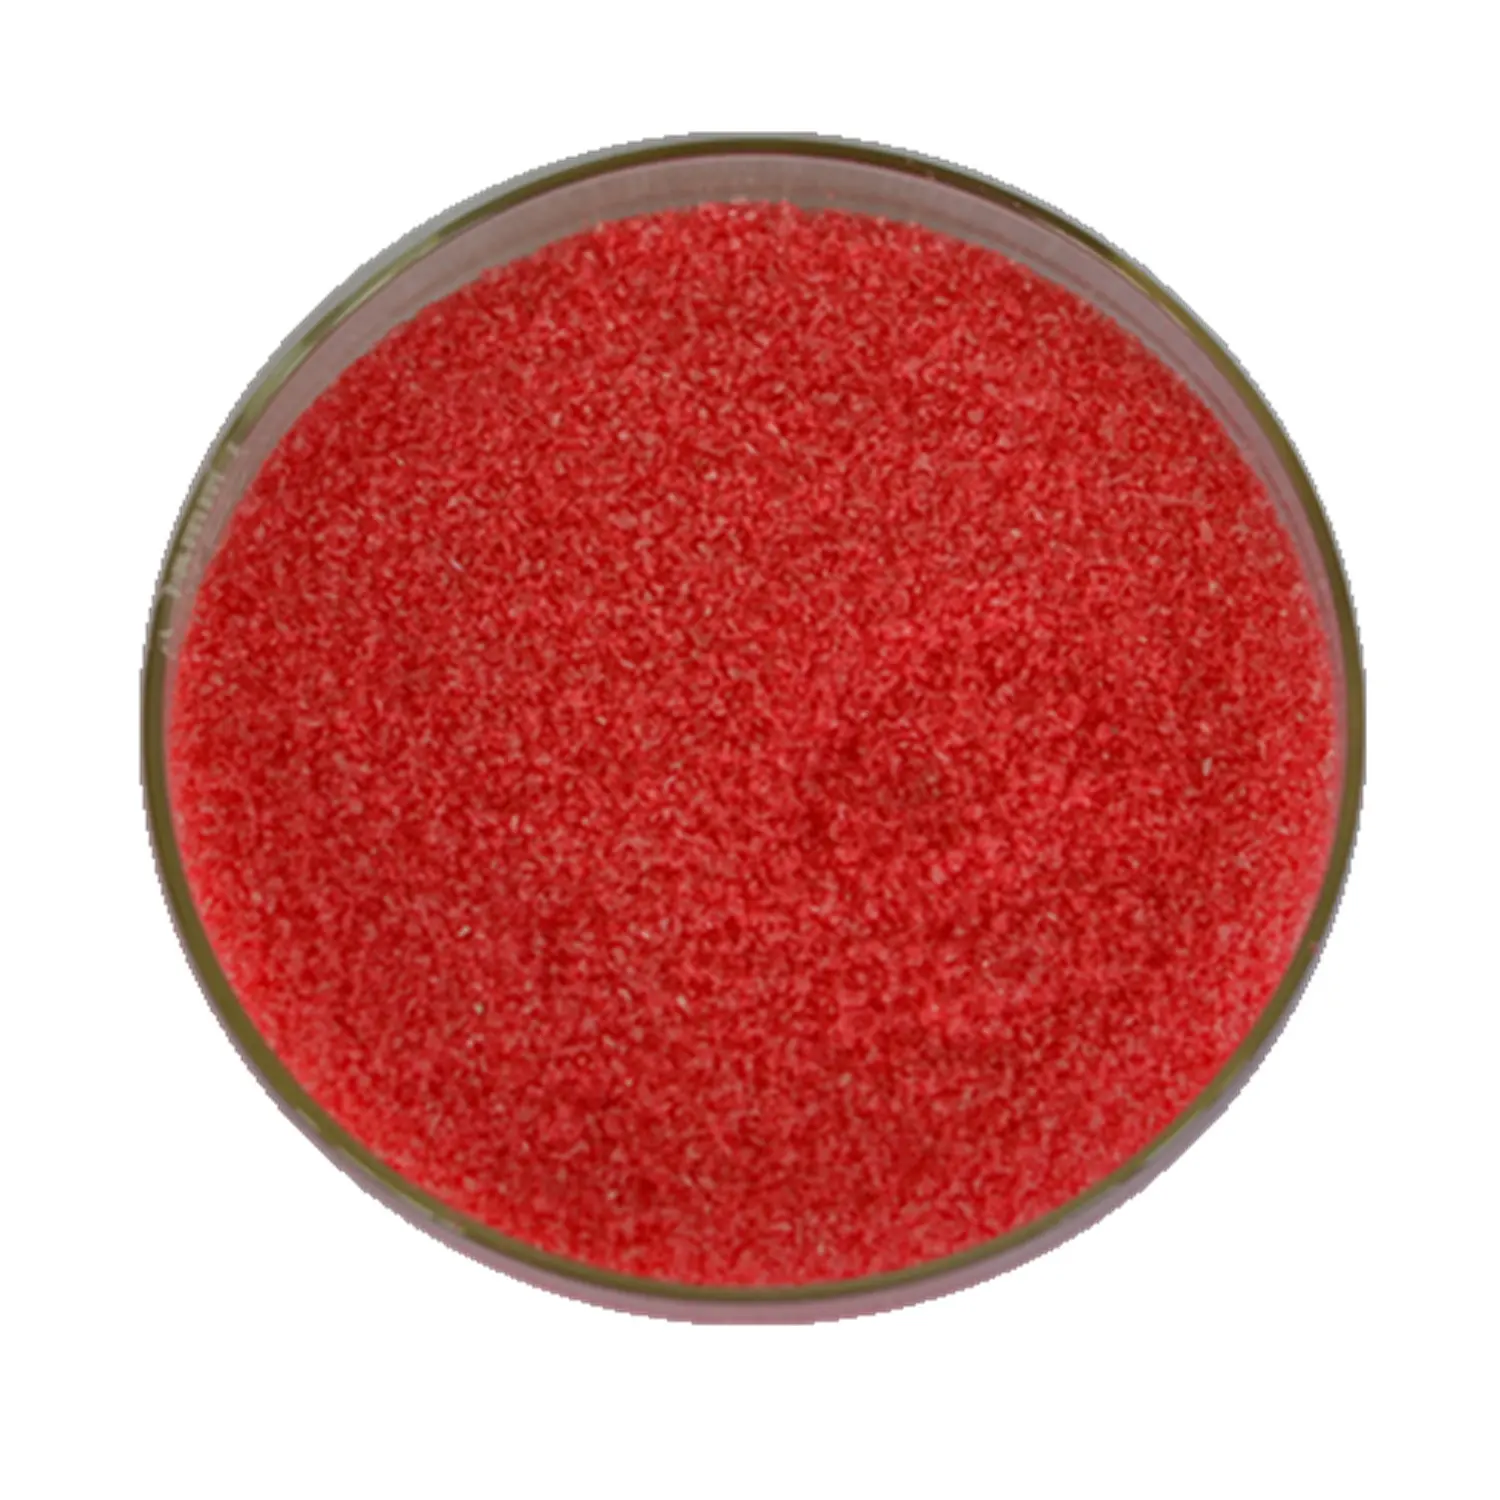 Water soluble NPK RED COLOR and PINK COLOR fertilizer